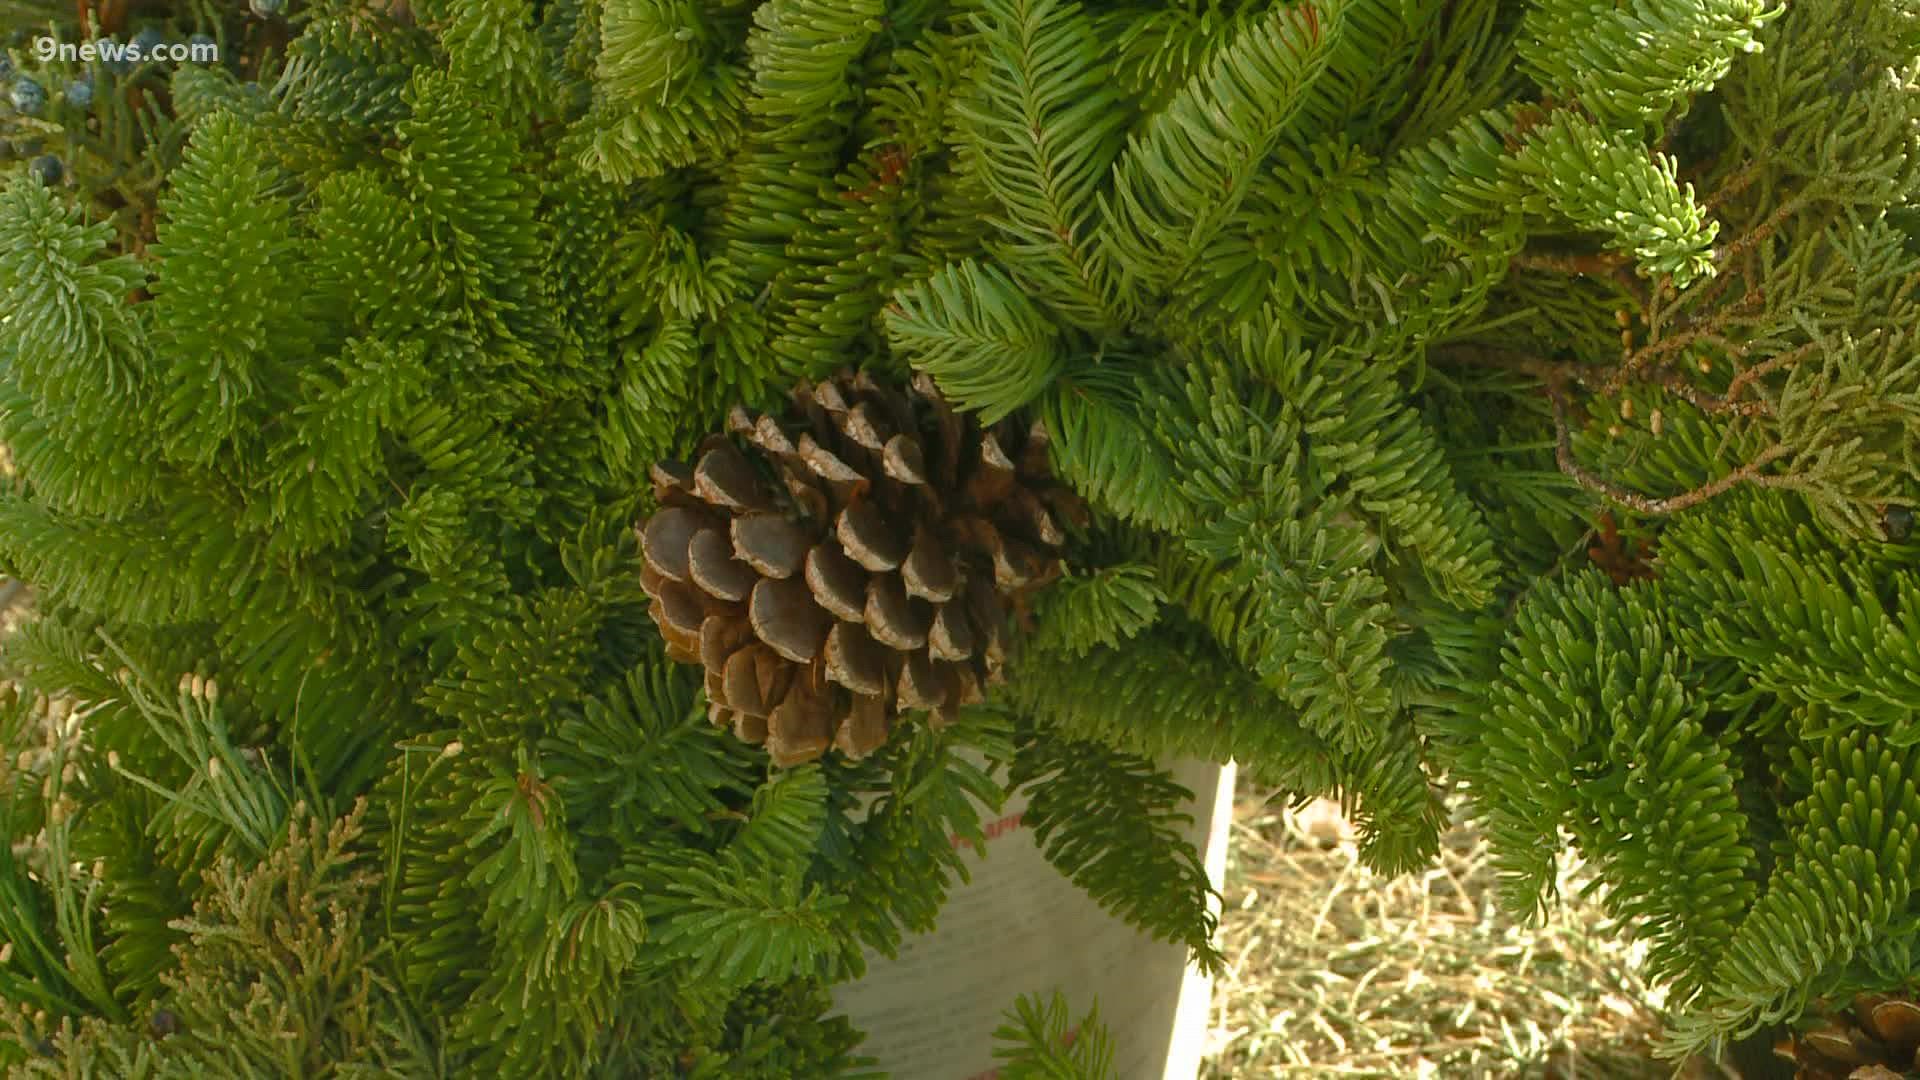 Take care with your evergreens and they'll last through the holidays.